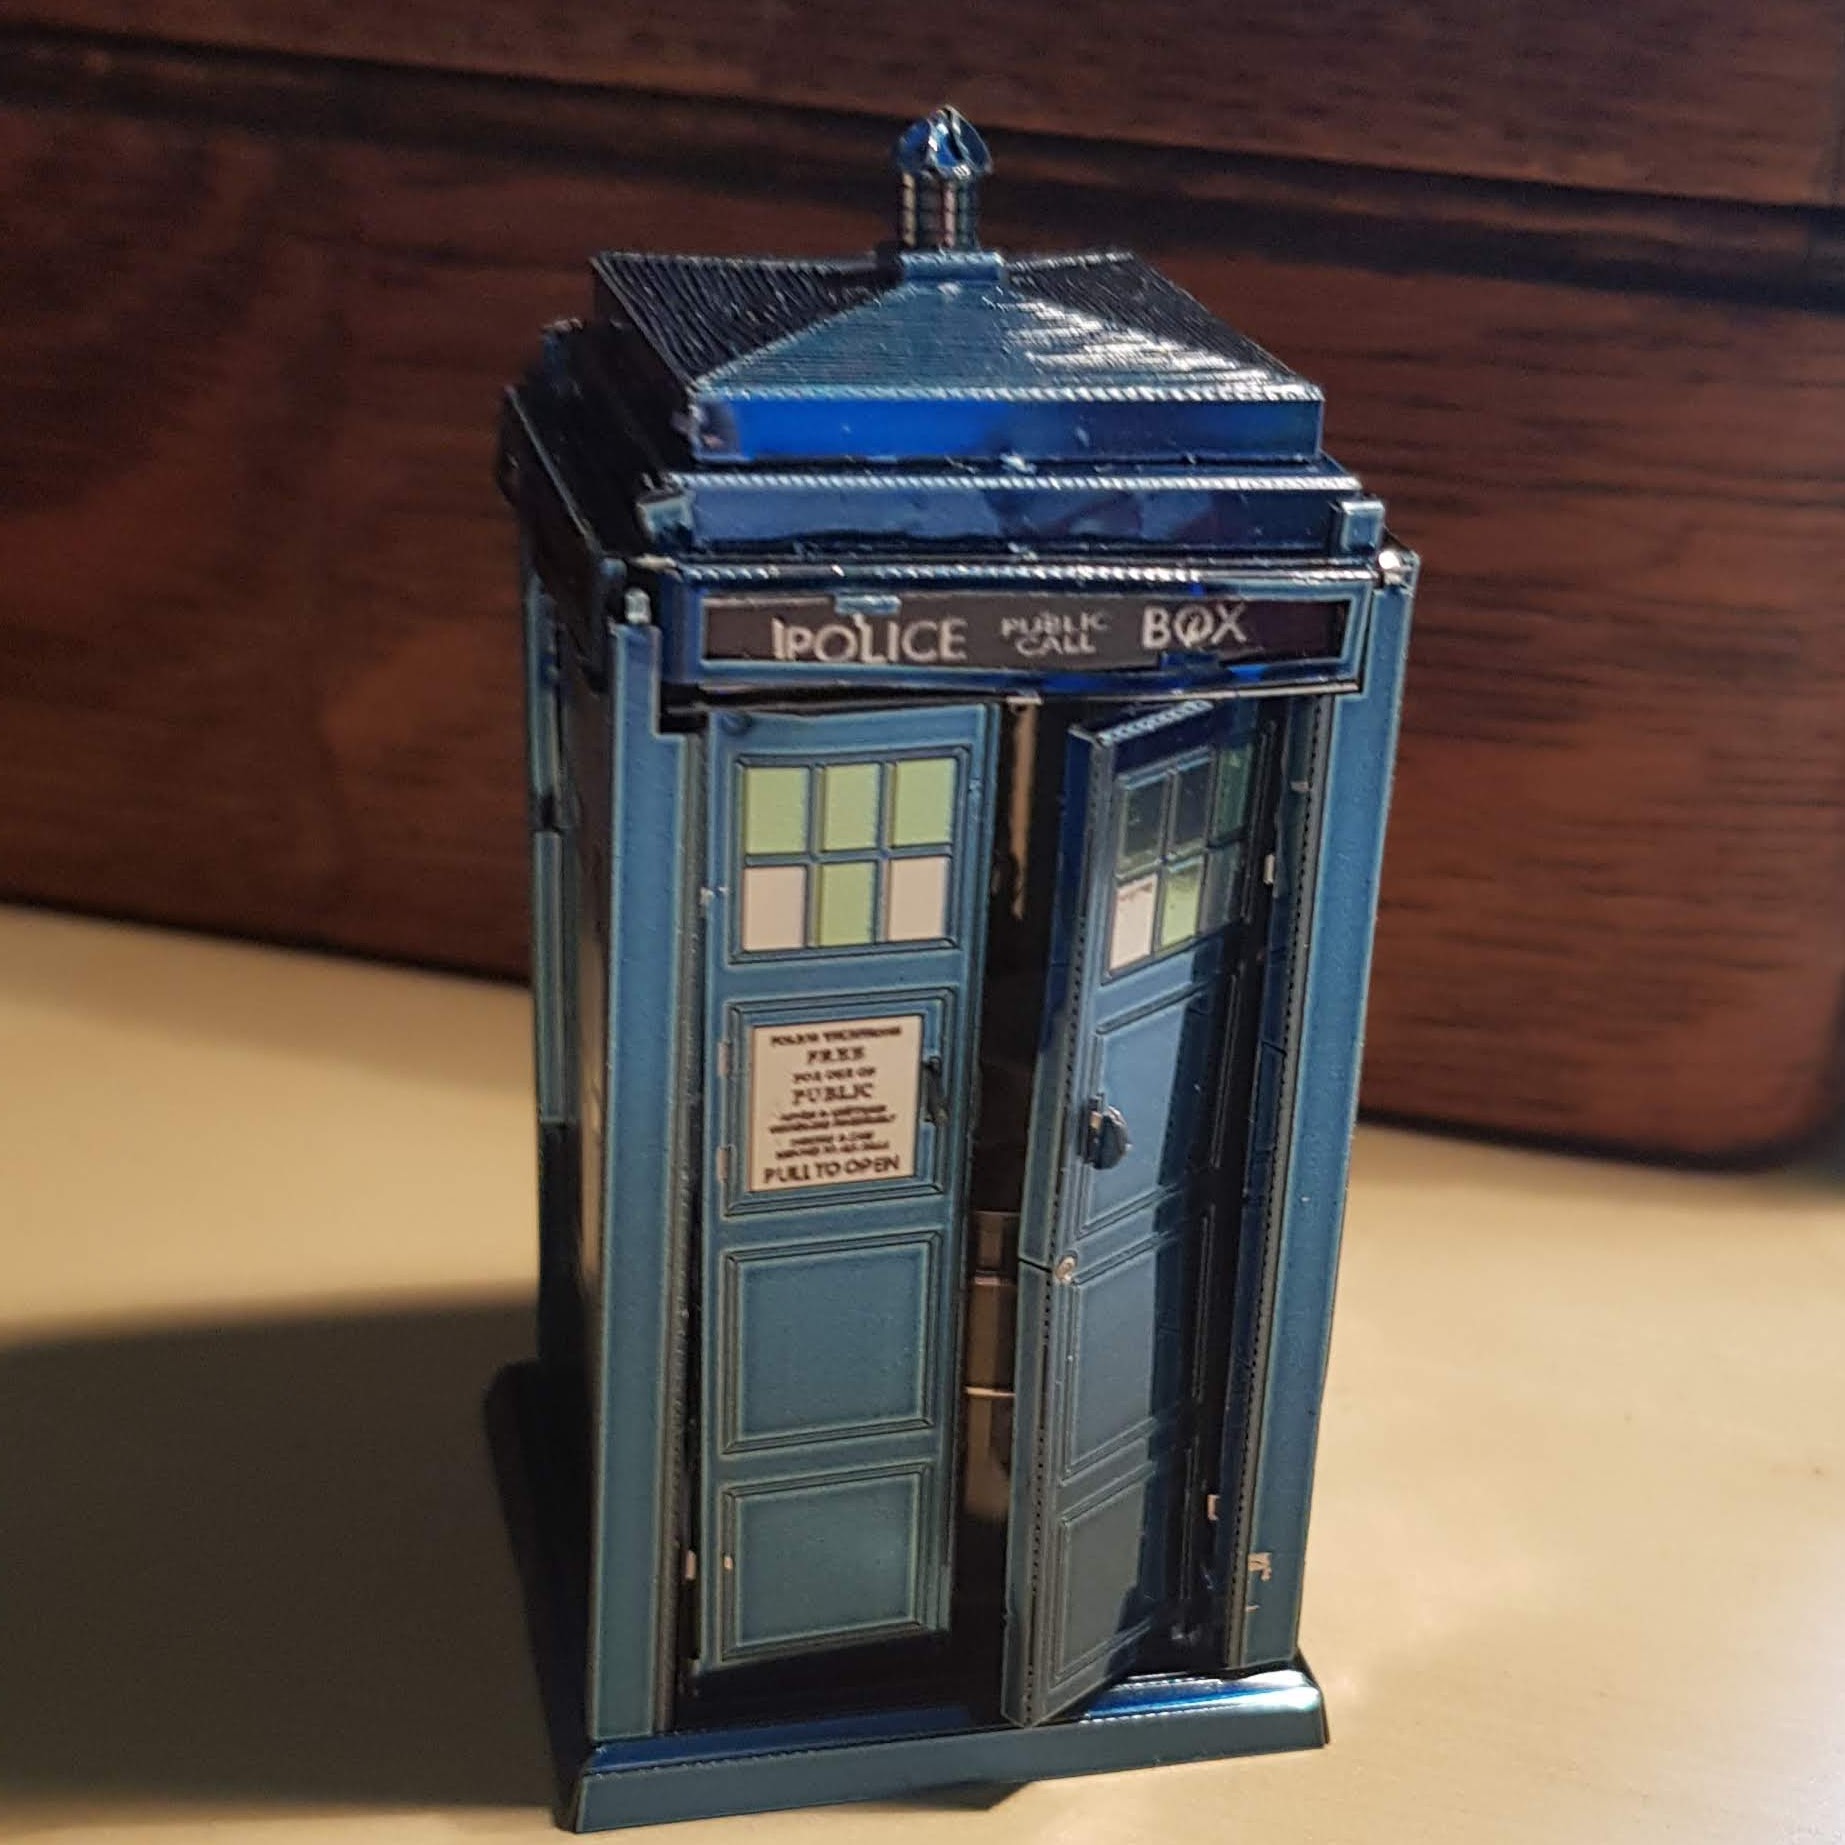 A small aluminium TARDIS. The door to go in is slightly open. It's casting a great shadow.